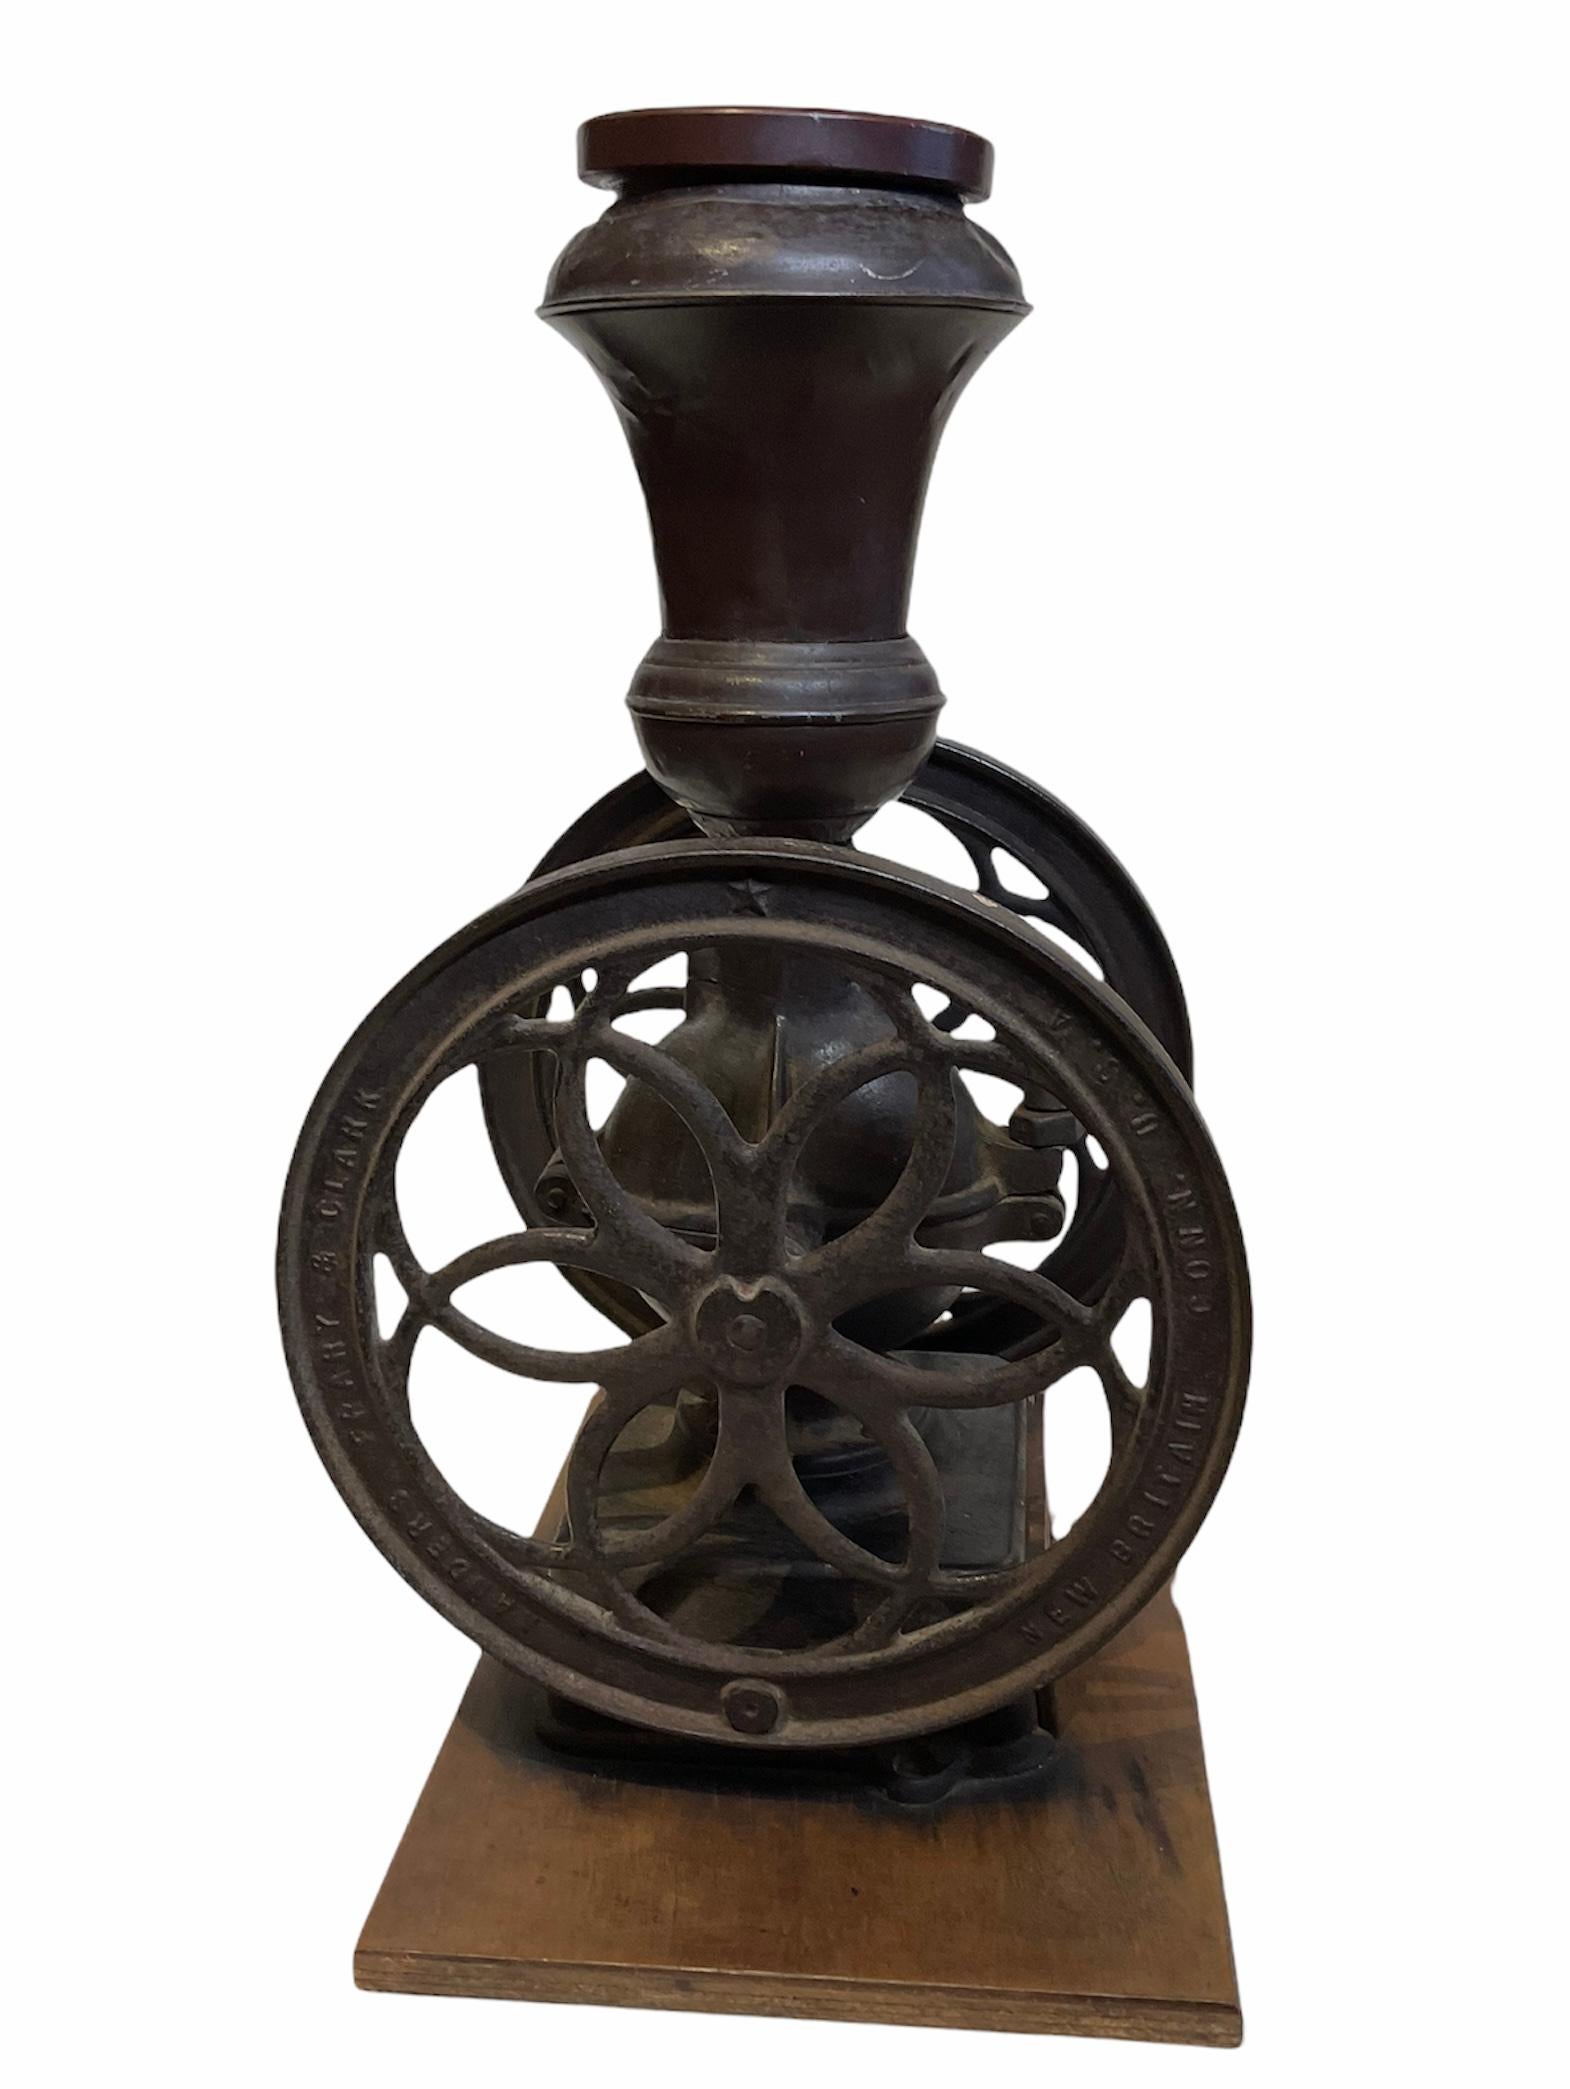 American Landers, Frary & Clark Cast Iron Coffee Grinder/Mill For Sale